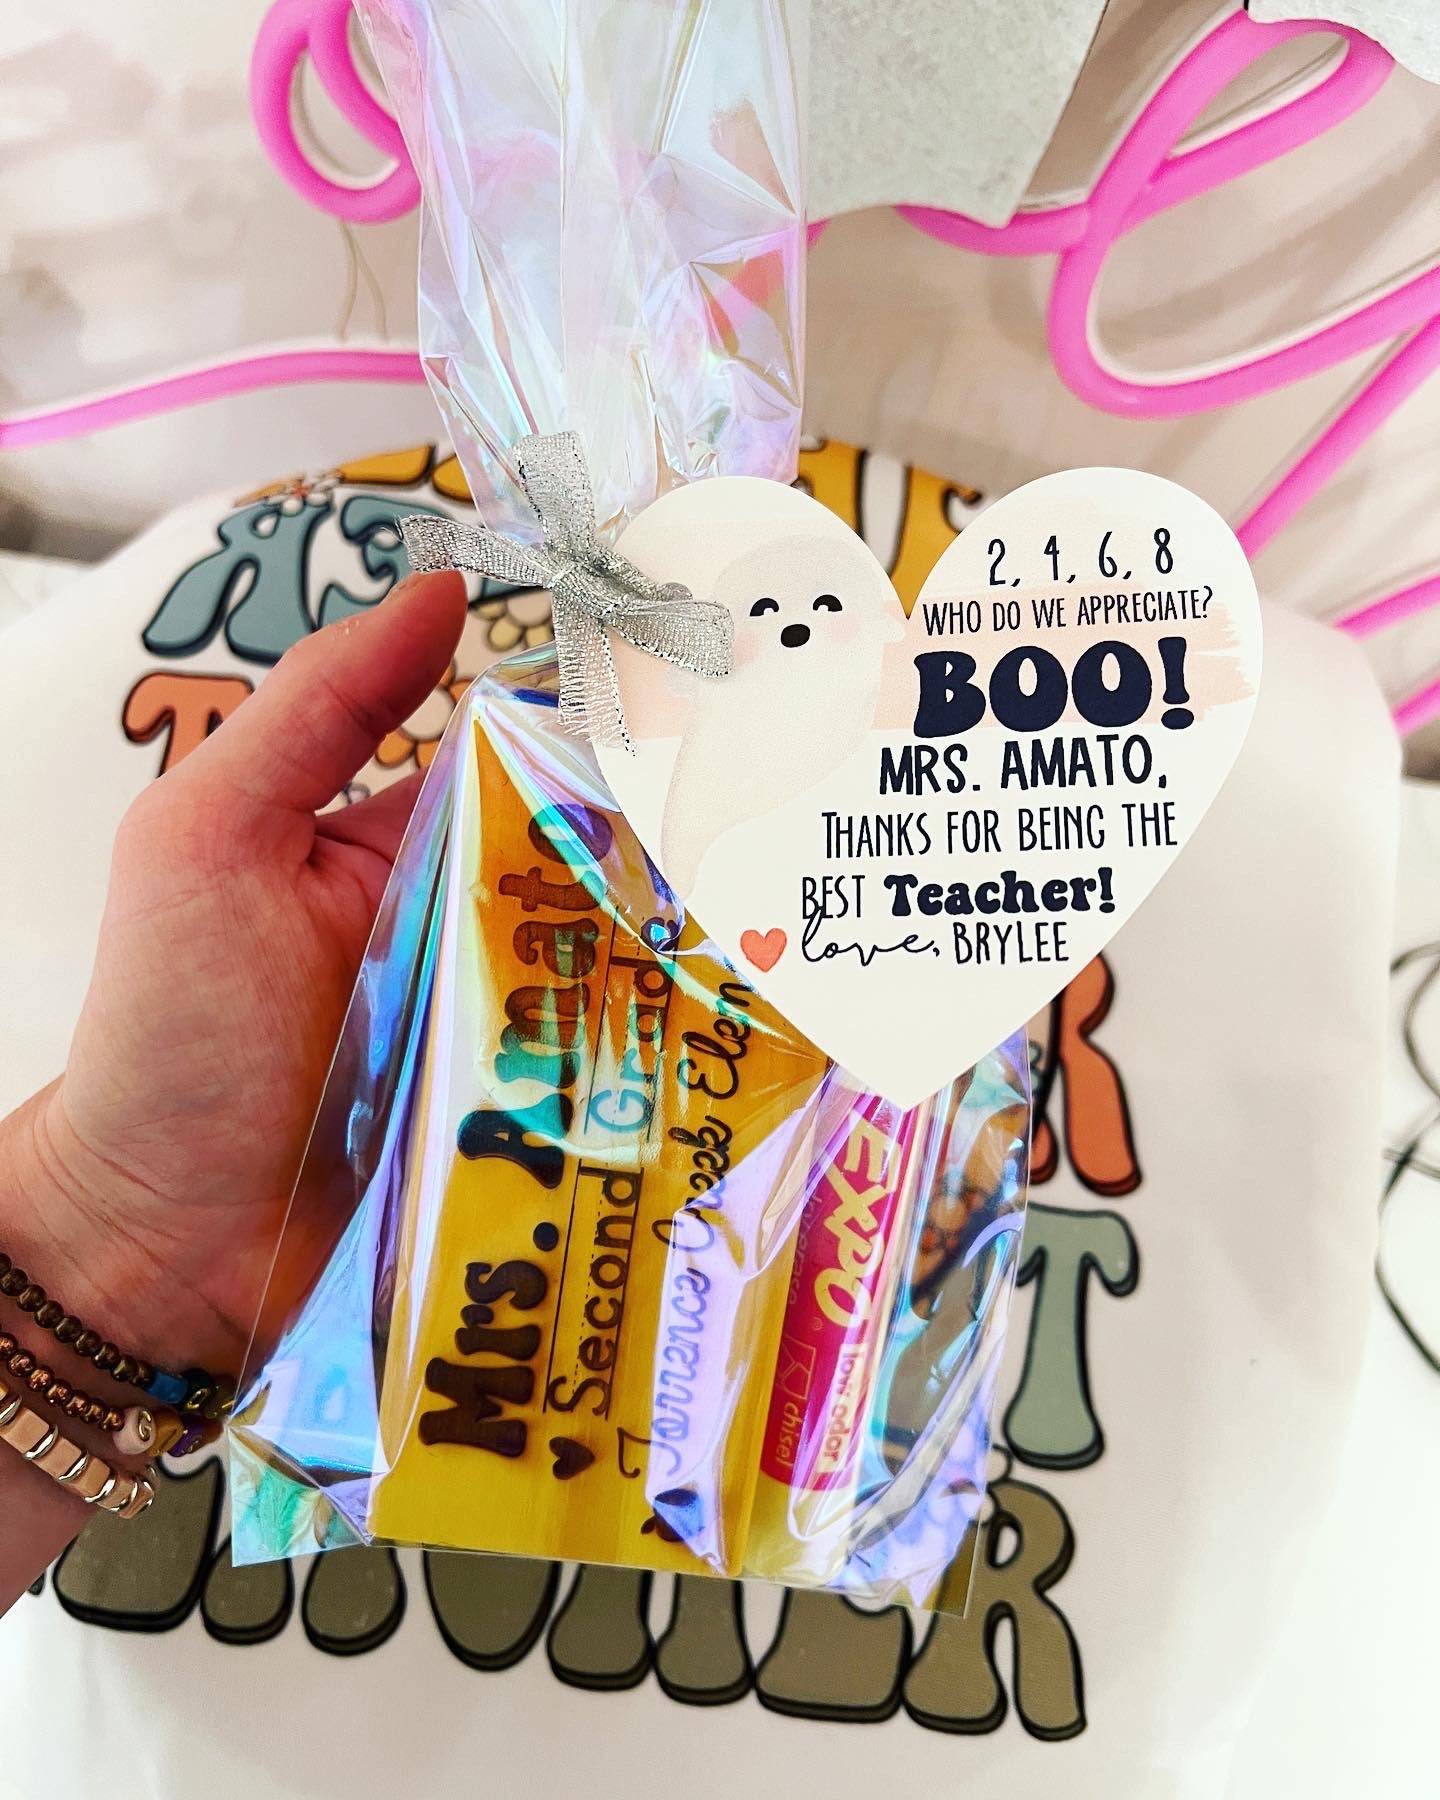 Personalized Engraved Whiteboard Eraser gift w/ Expo Marker, Personalized Halloween Card, Holographic cellophane gift bag tied with ribbon!